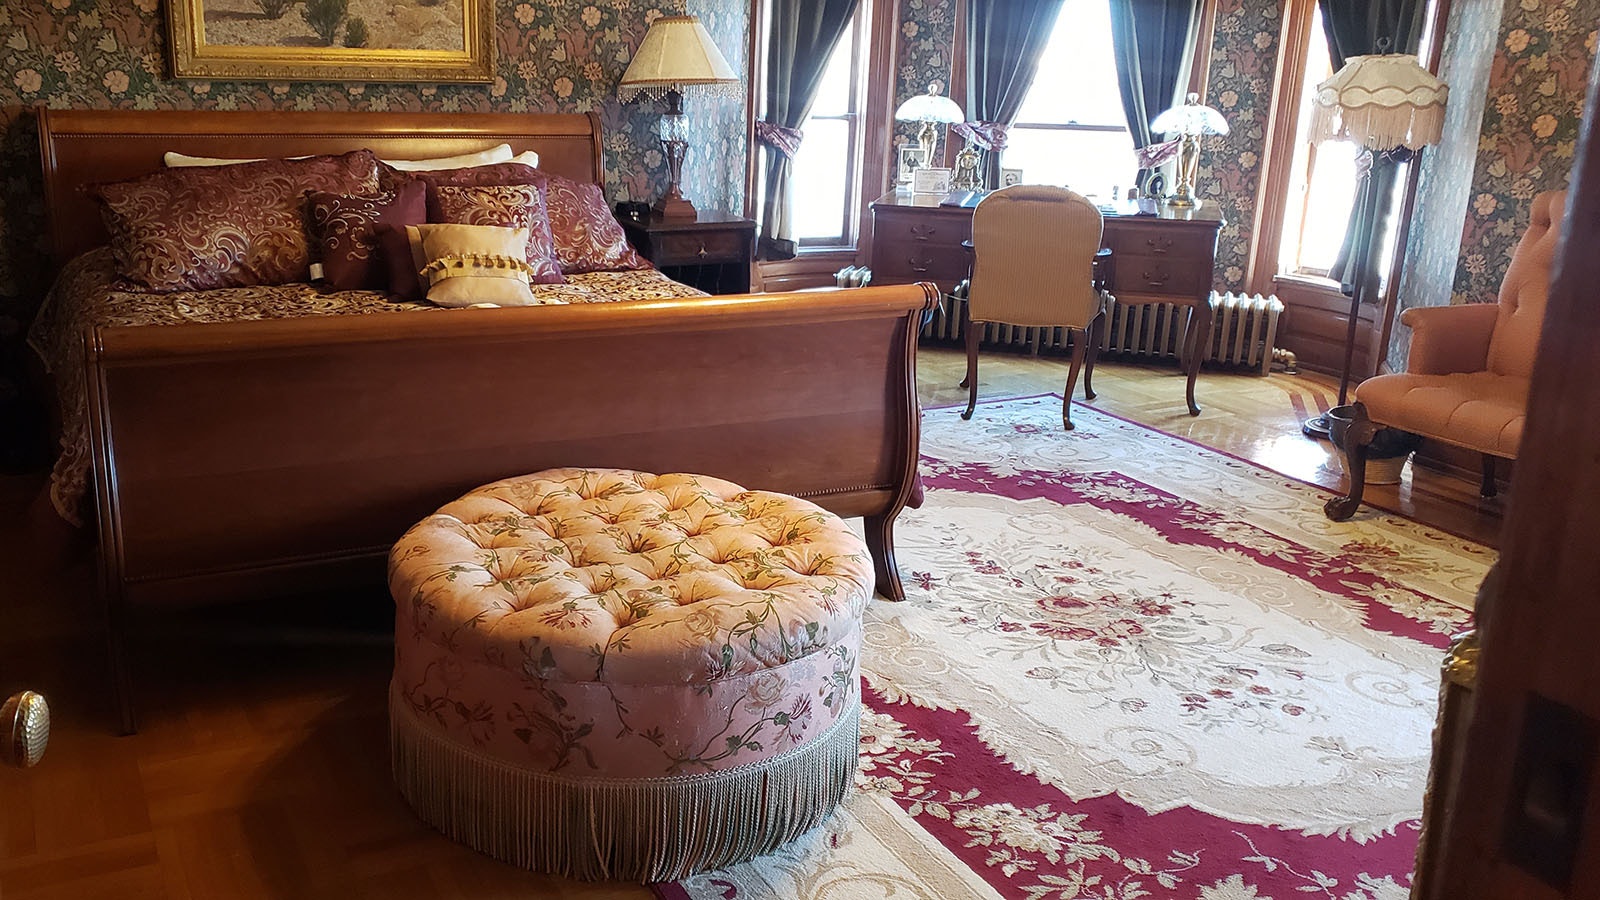 Sleep like a prince or a president. The Nagle-Warren mansion was a favorite of folks like Teddy Roosevelt and William Howard Taft.